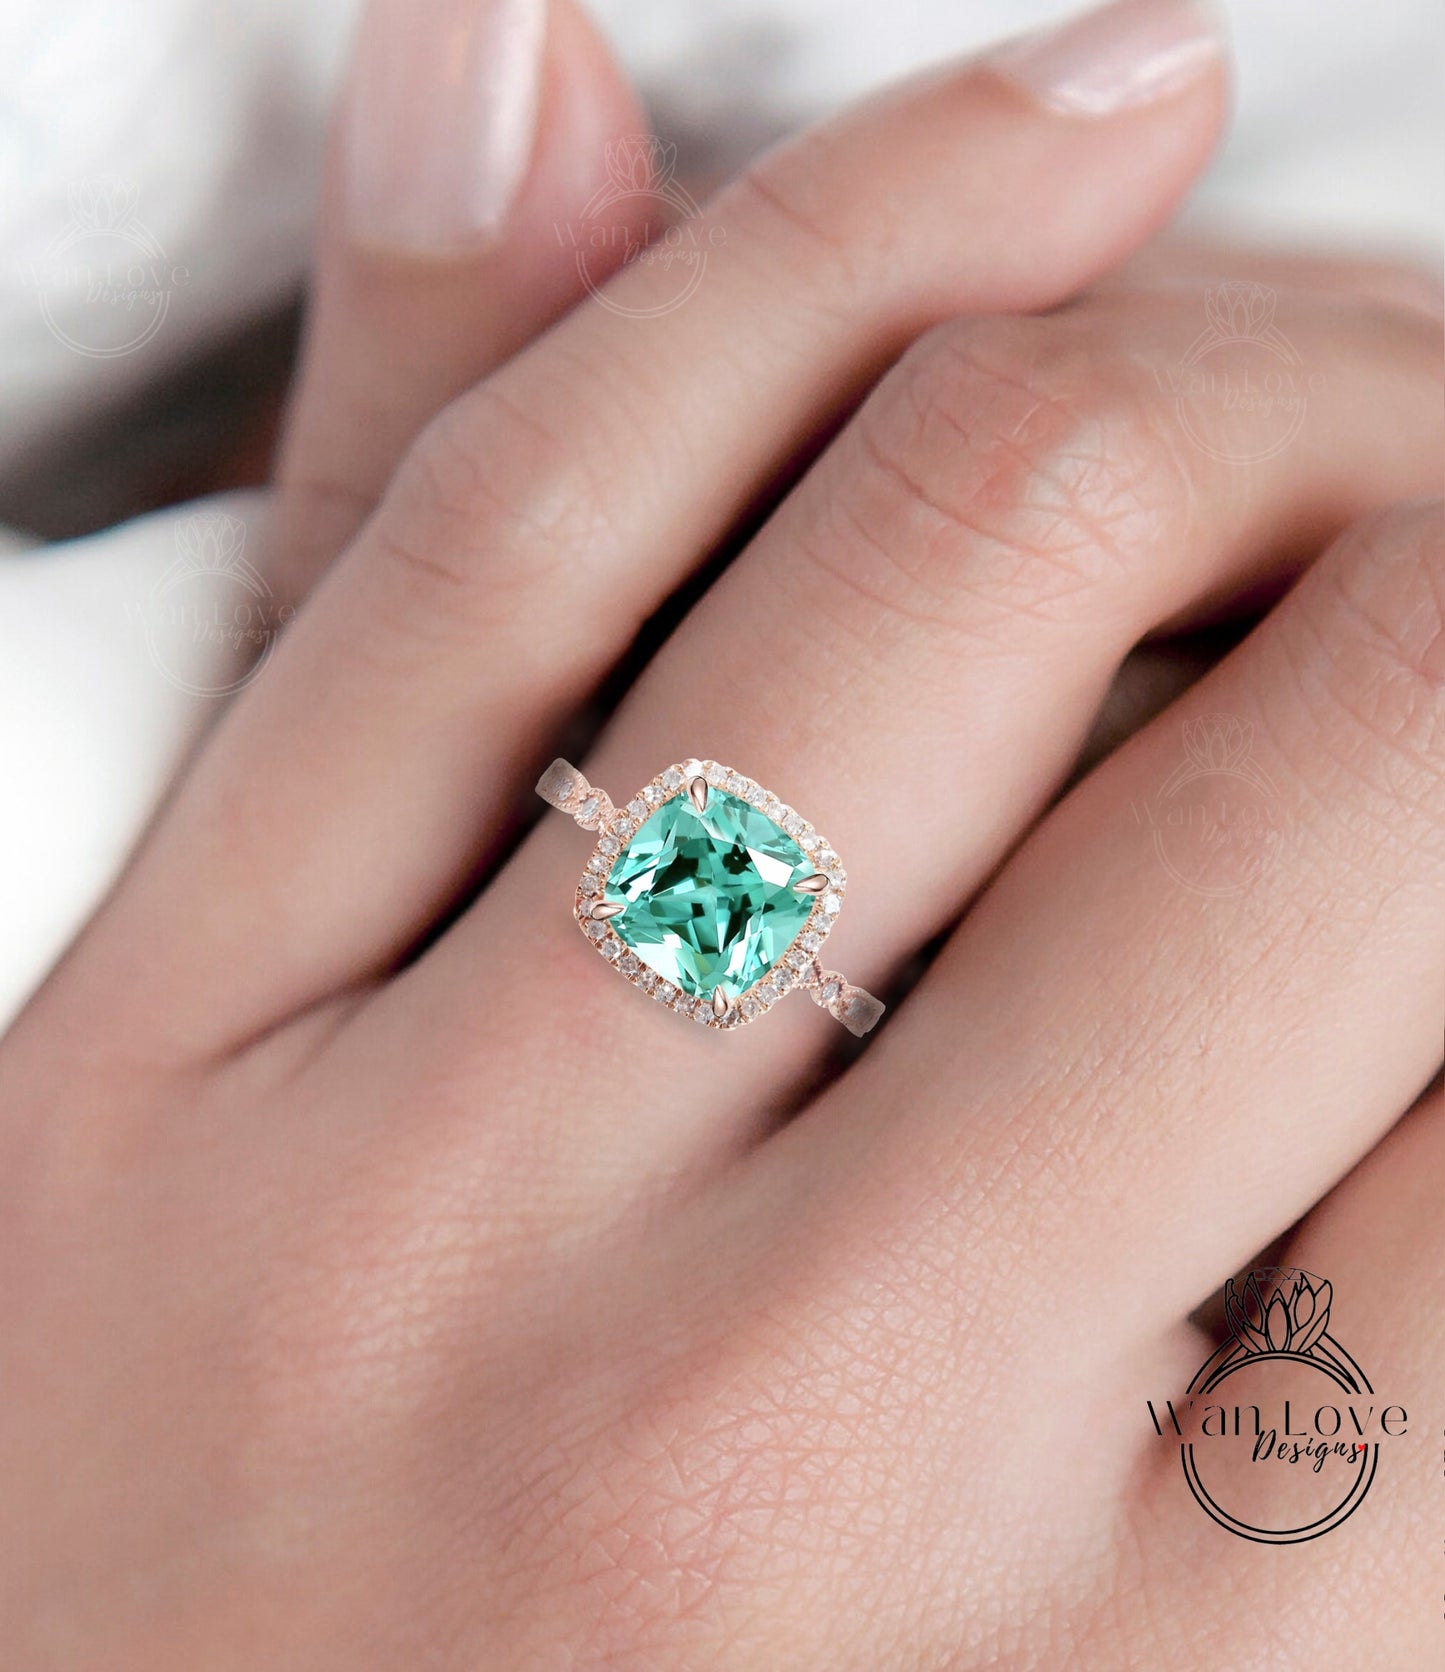 Teal Spinel Engagement Ring Cushion Halo Diamond Spinel Ring vintage Engagement Diamond Ring milgrain Leaf Scalloped Band Bridal promis ring